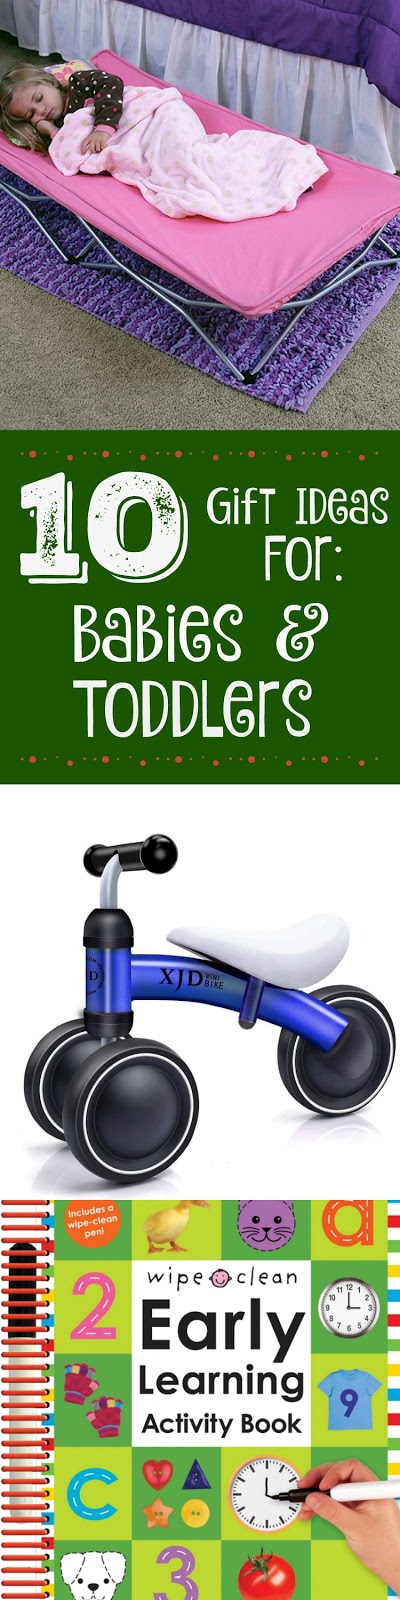 10 Holiday Gifts Ideas for Babies & Toddlers...educational toys, fun learning activities, cute beds and comfort items, plus more! (sweetandsavoryfood.com)